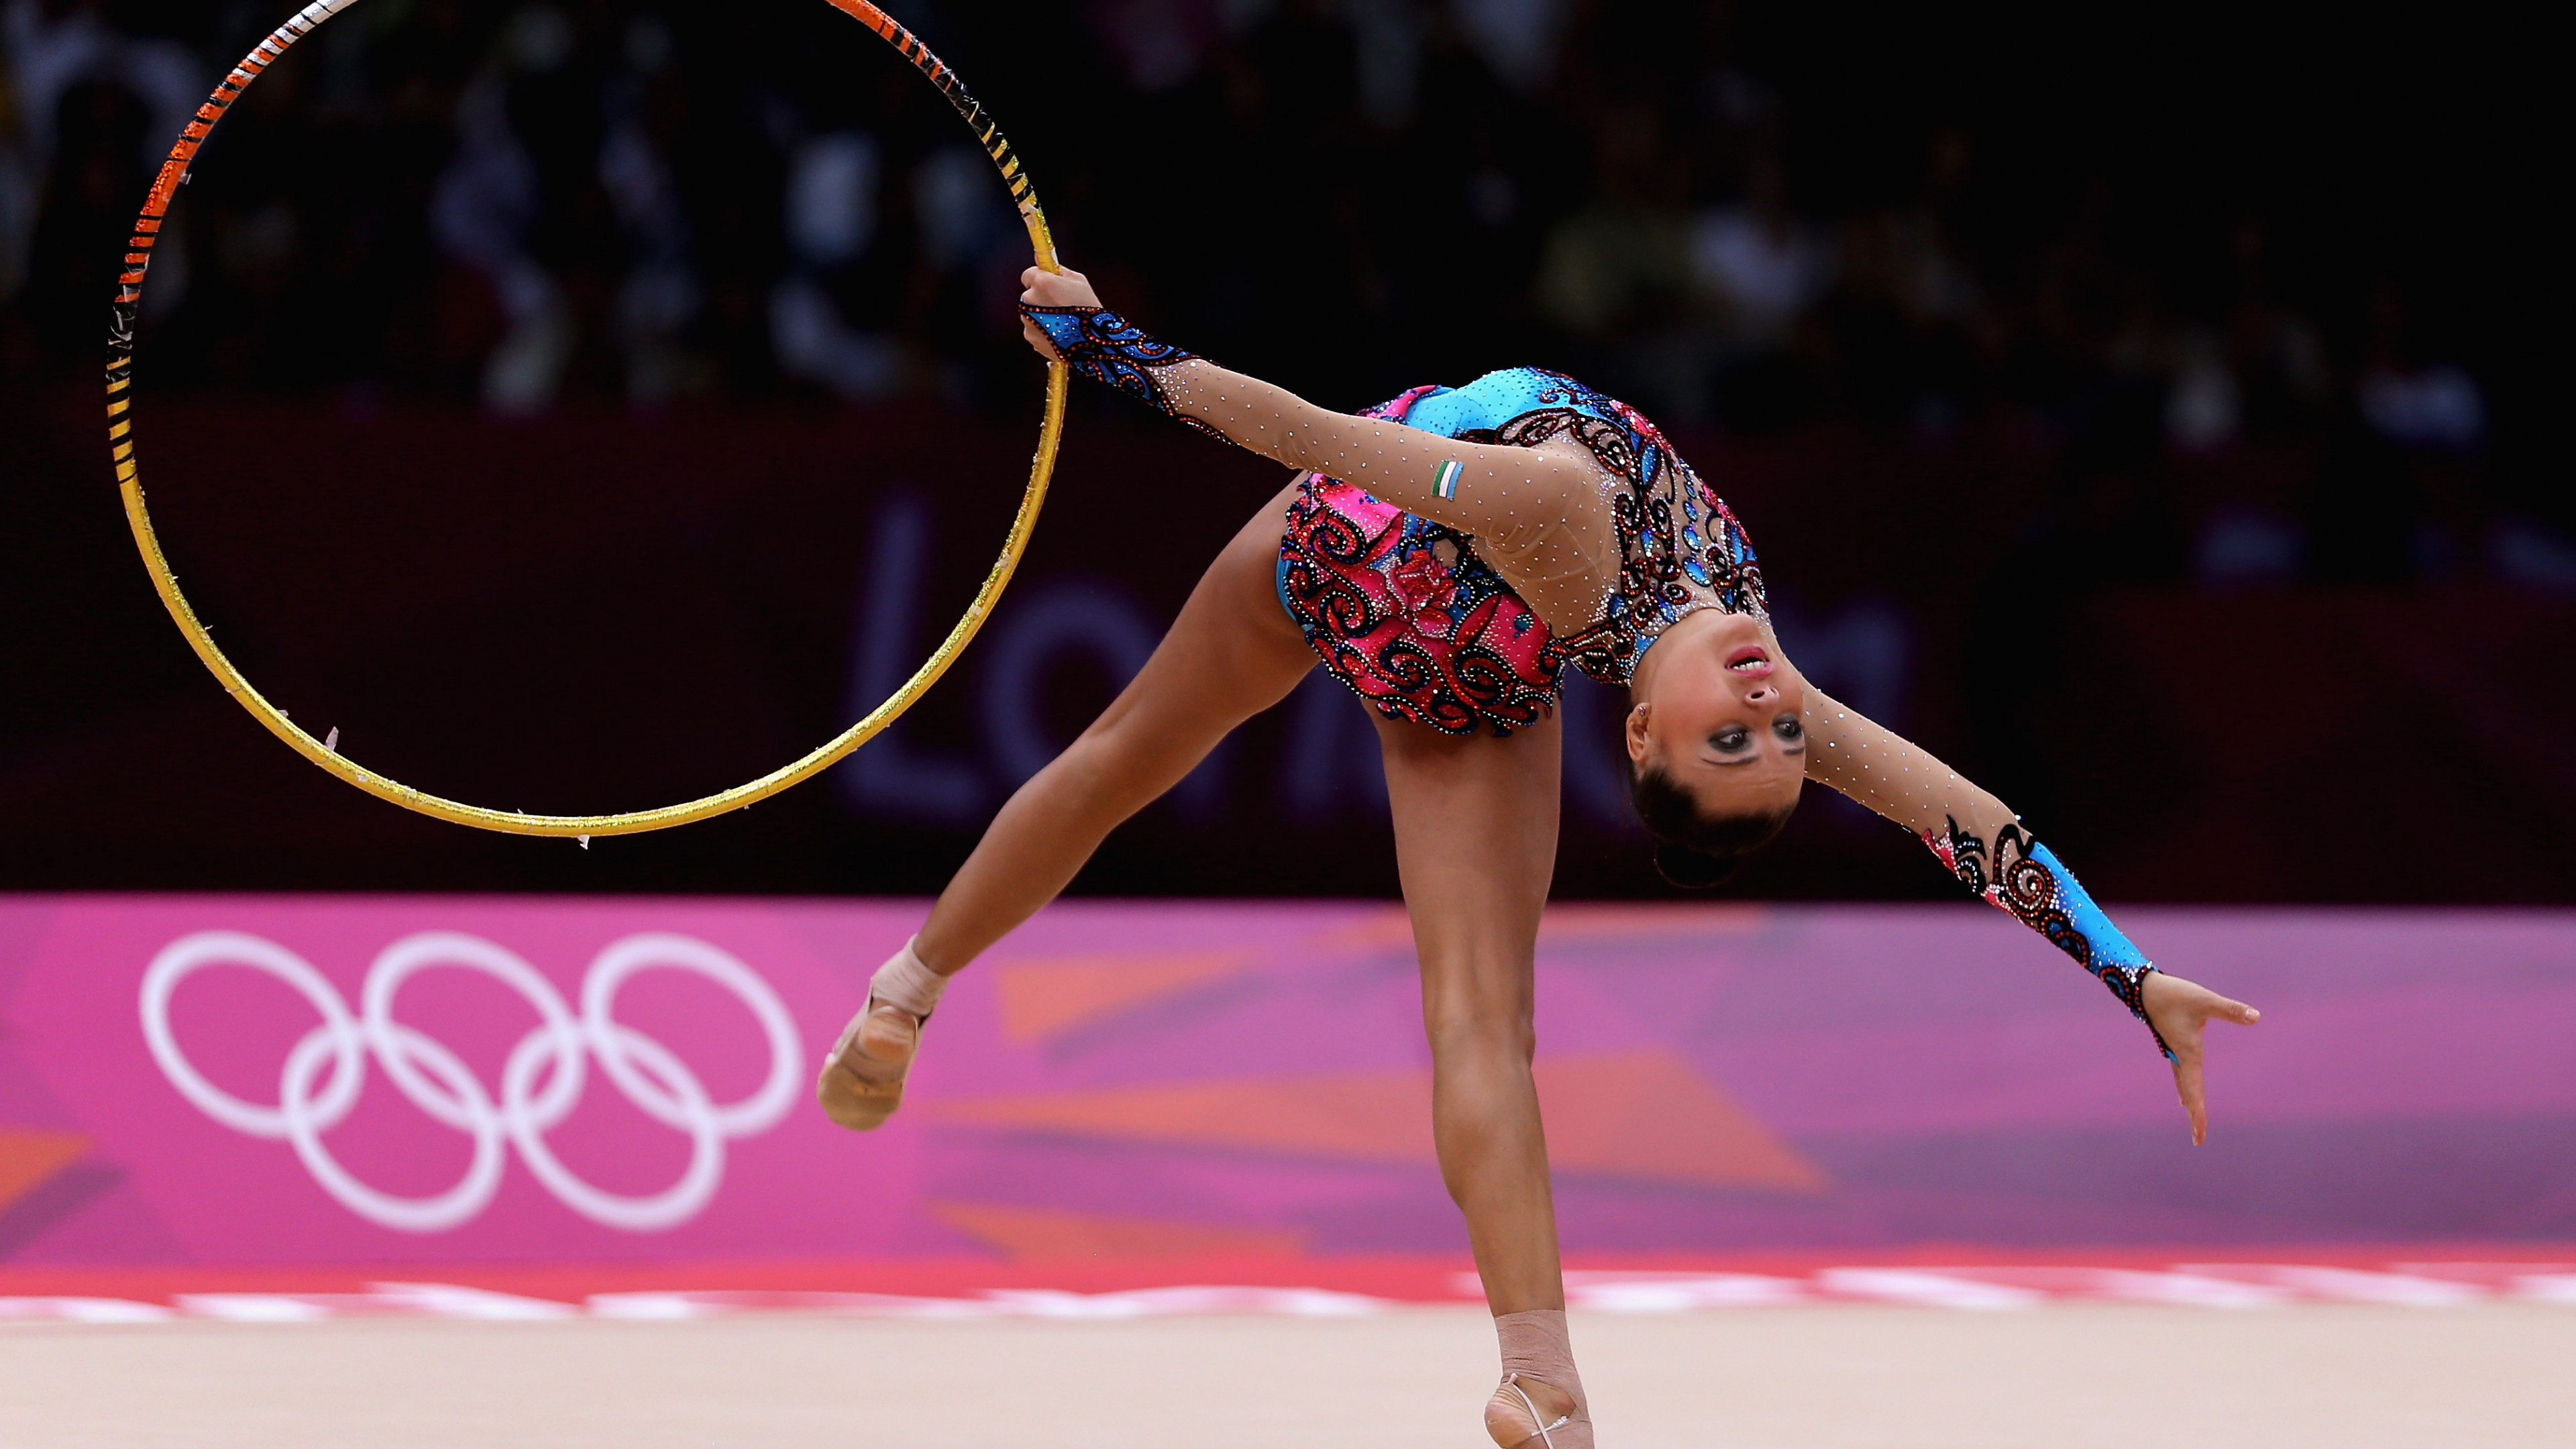 Acrobatic Gymnastics: A professional gymnast performs with a hoop at the Olympic Games. 3840x2160 4K Background.